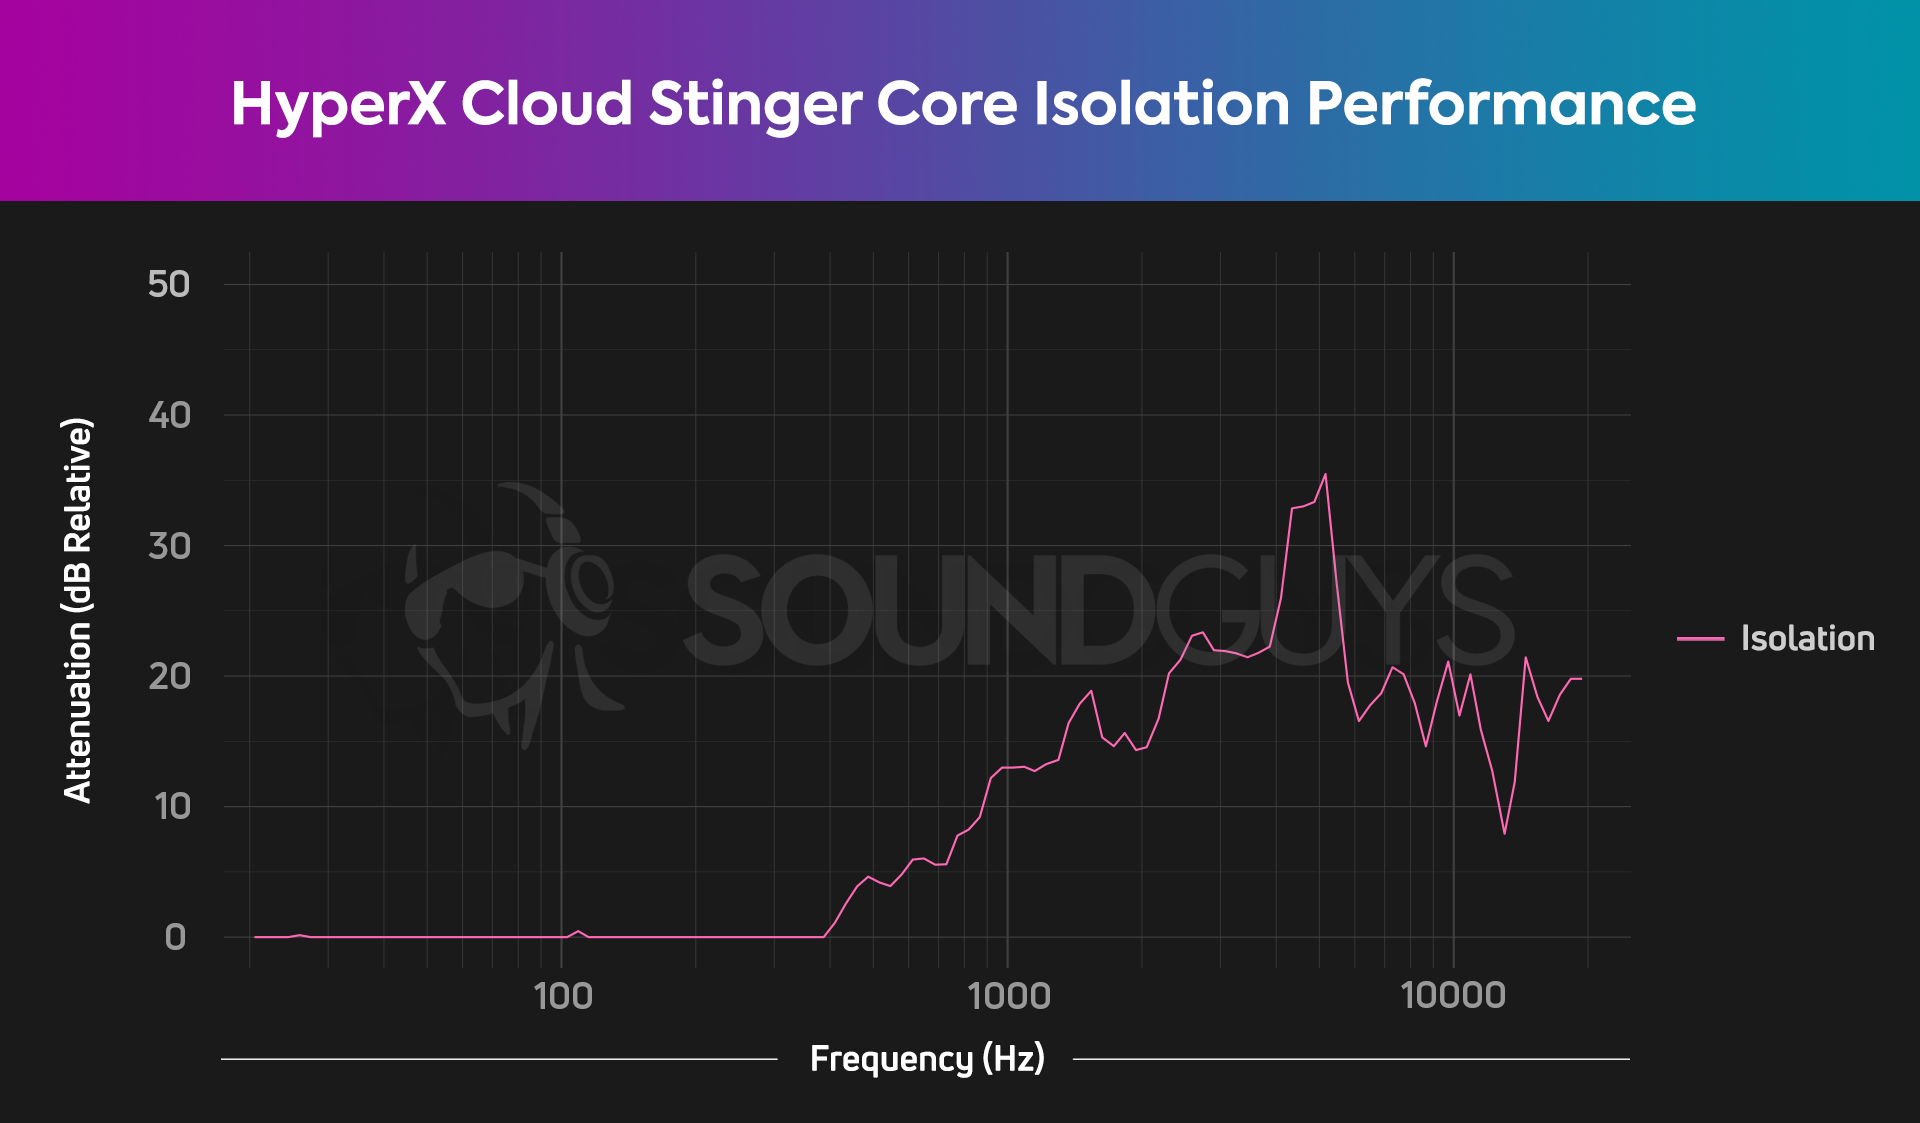 The isolation chart for the HyperX Cloud Stinger Core.